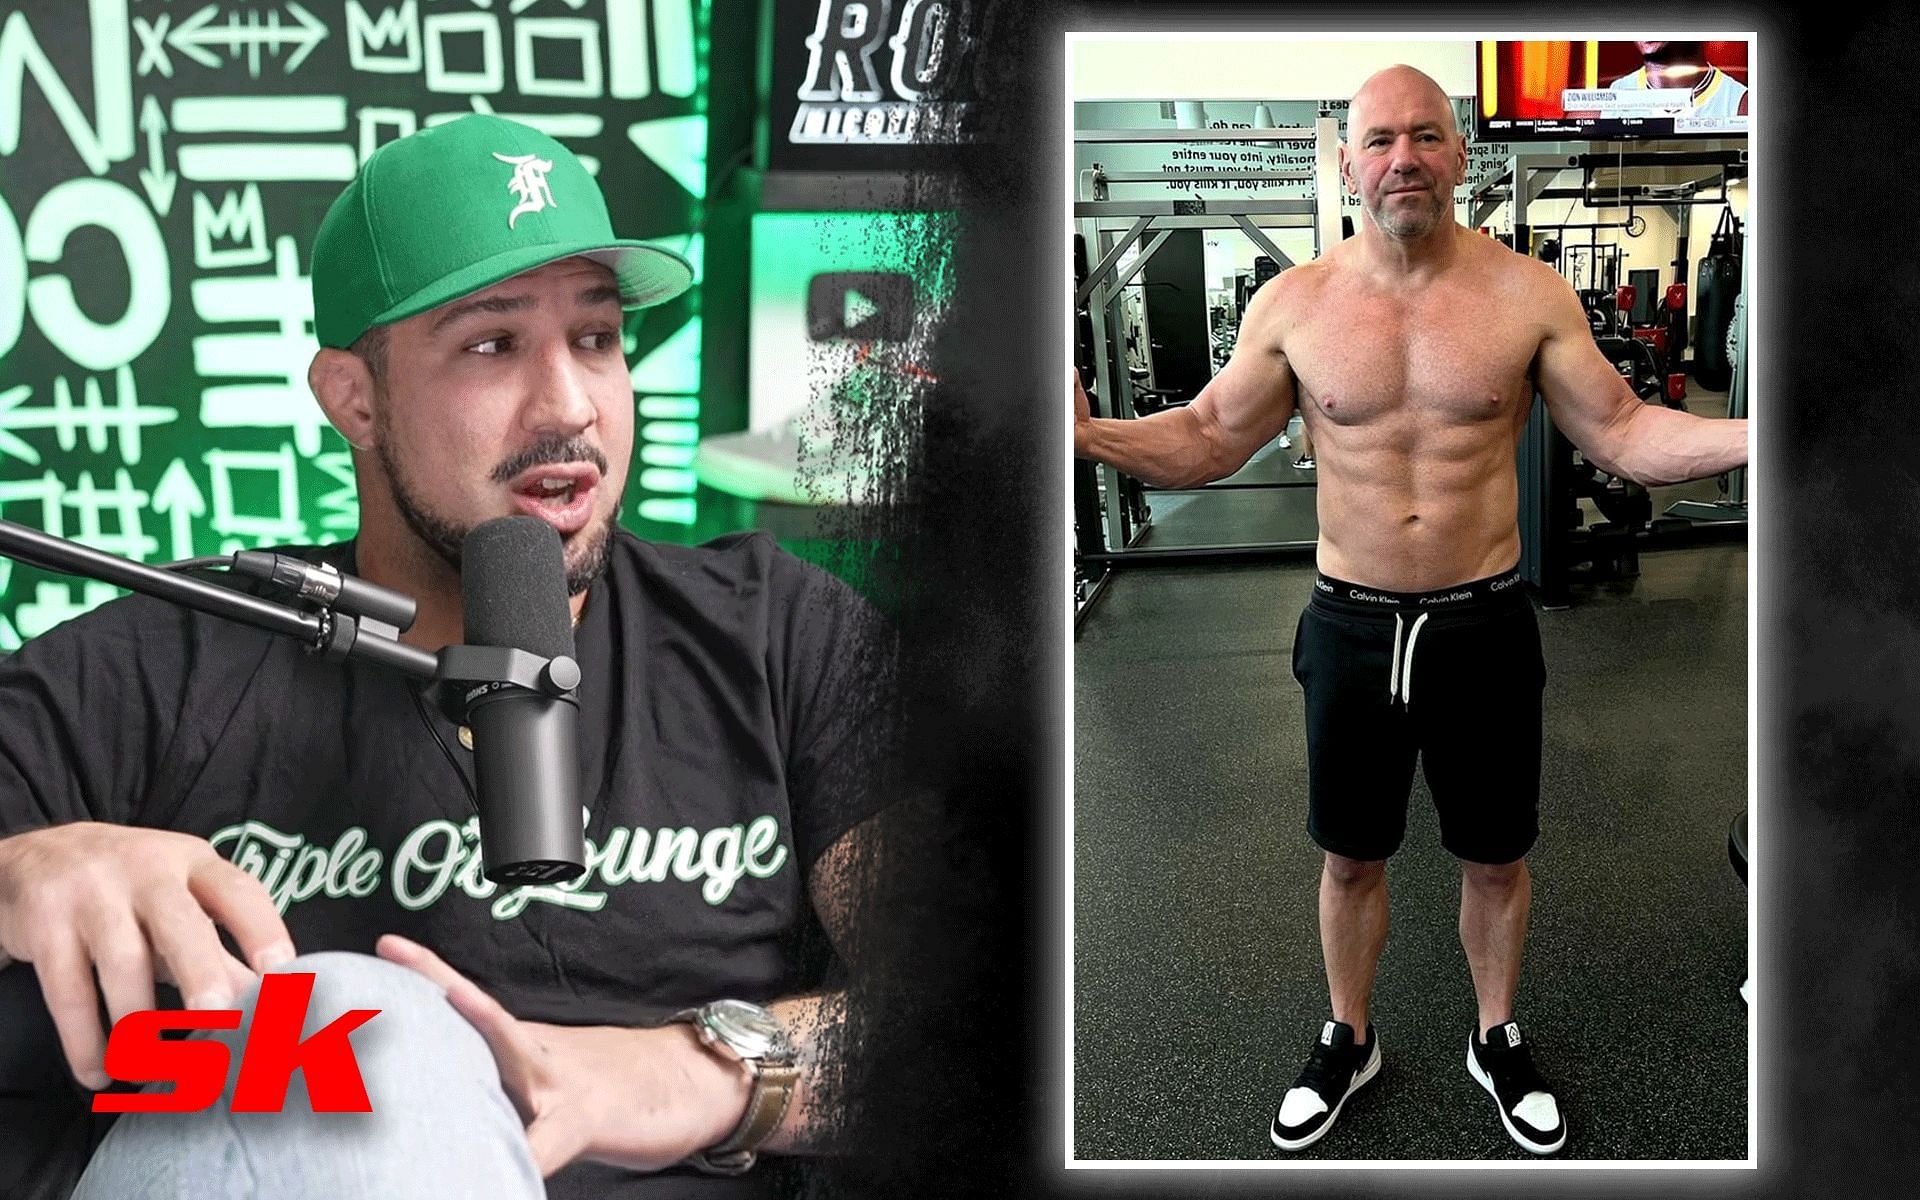 Brendan Schaub (left) and Dana White (right). [Images courtesy: left image from YouTube Thiccc Boy and right image from Instagram @danawhite]